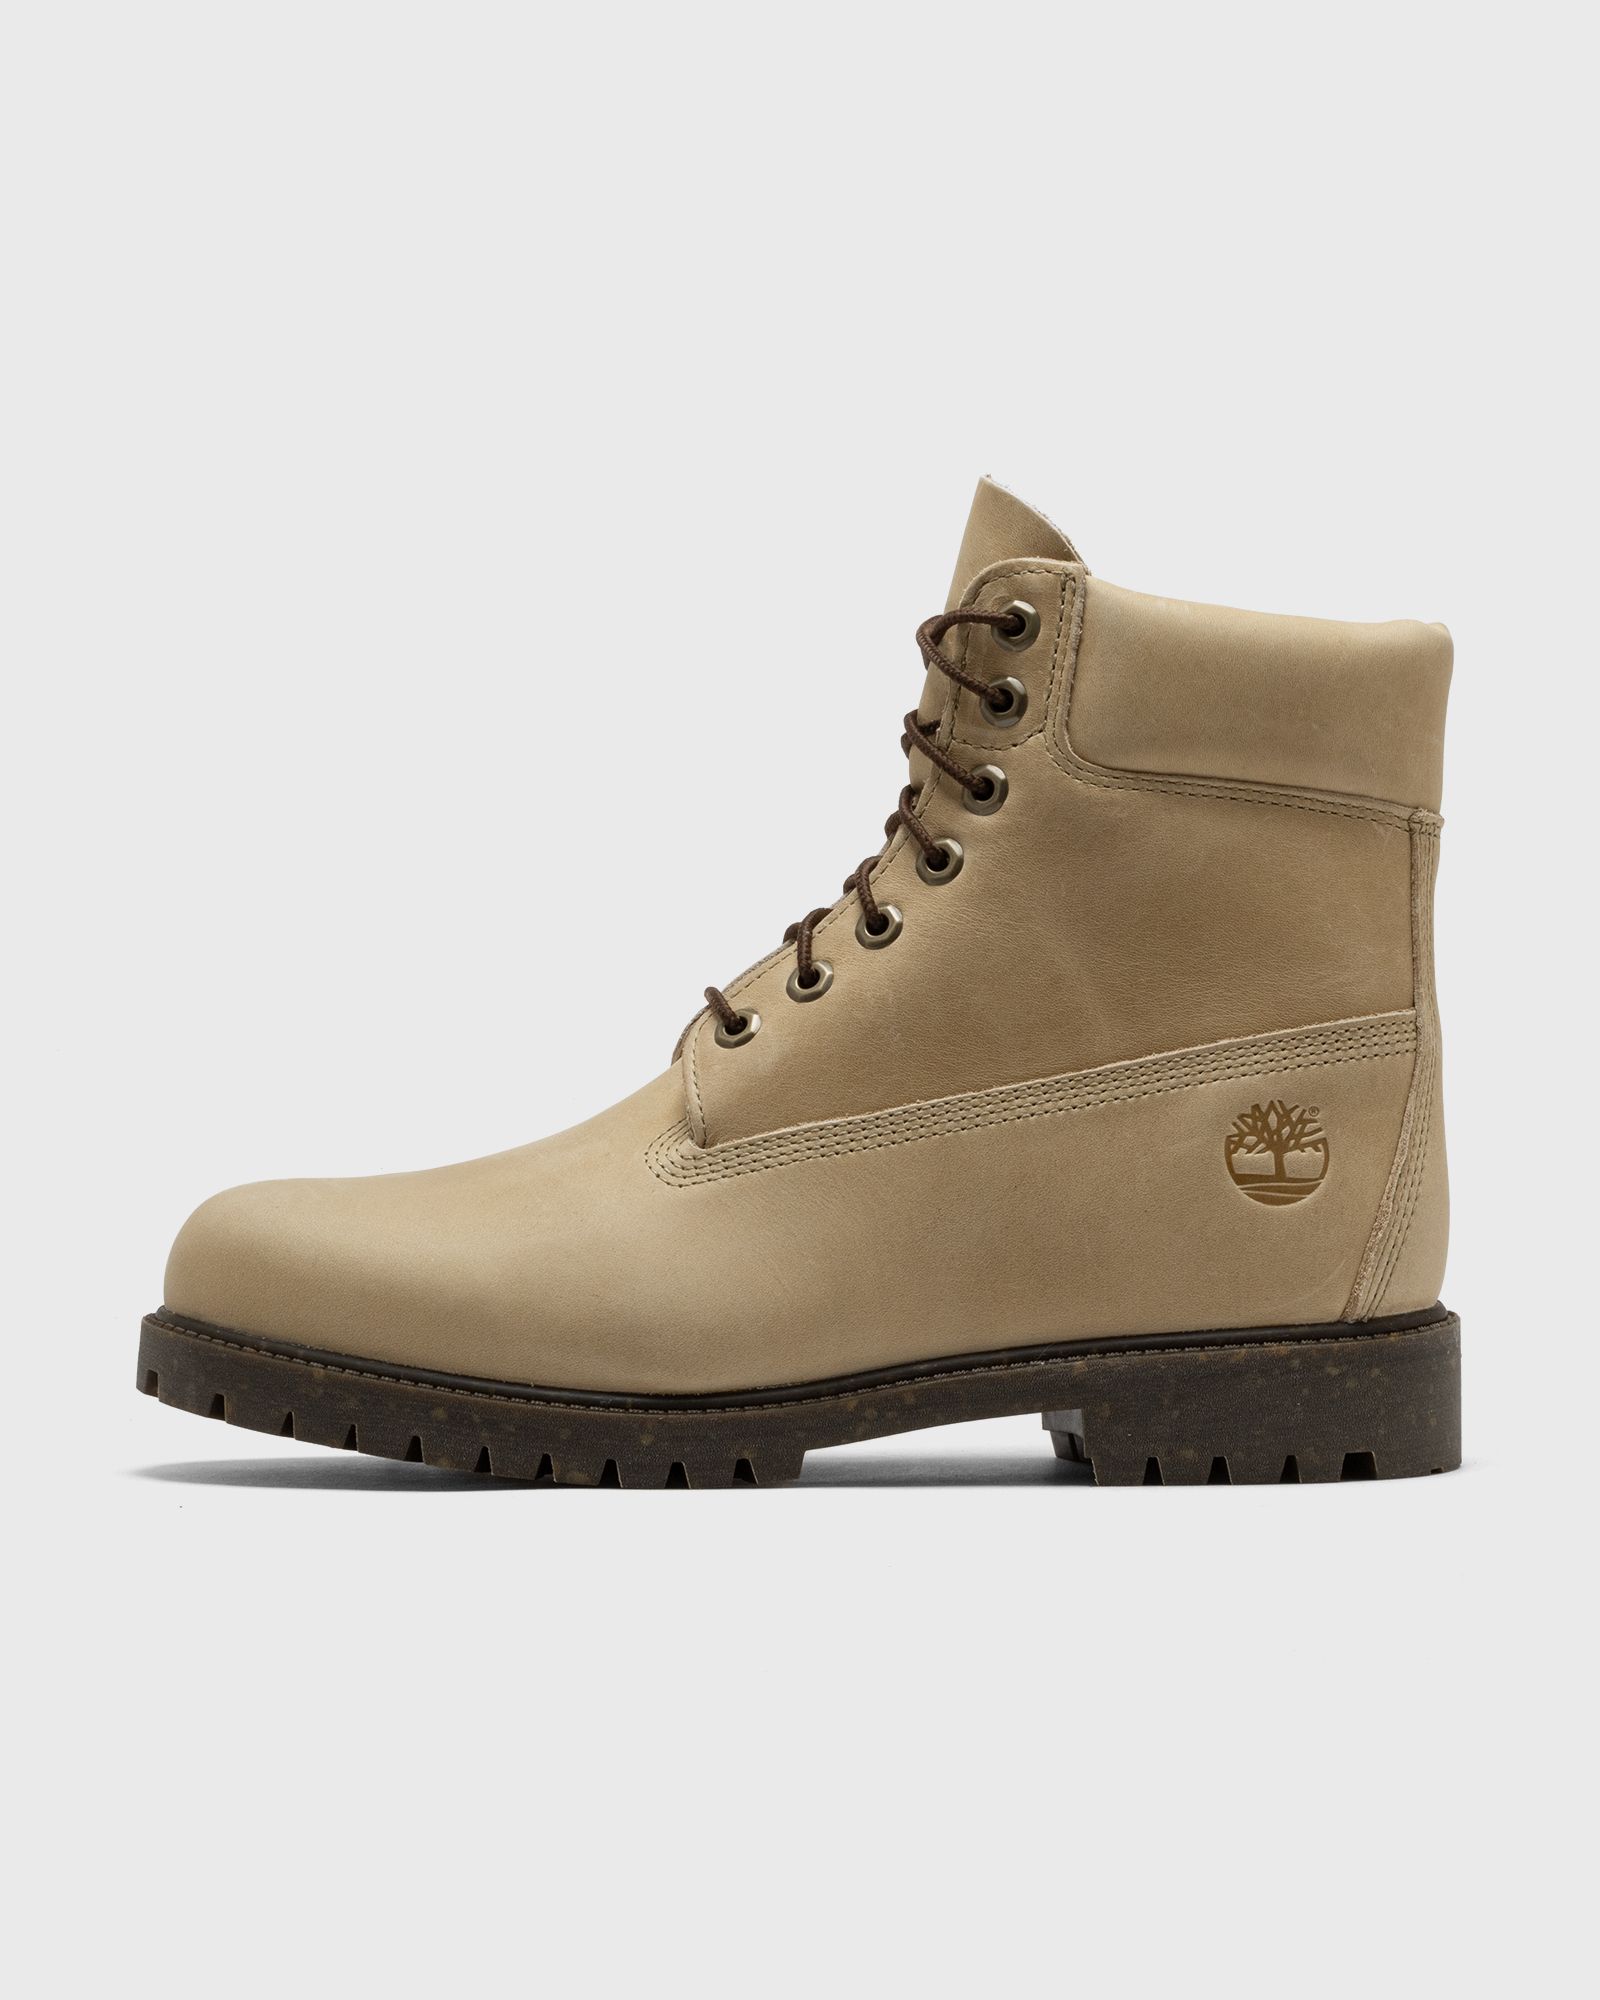 Timberland - heritage 6 inch lace up waterproof boot men boots beige in größe:43